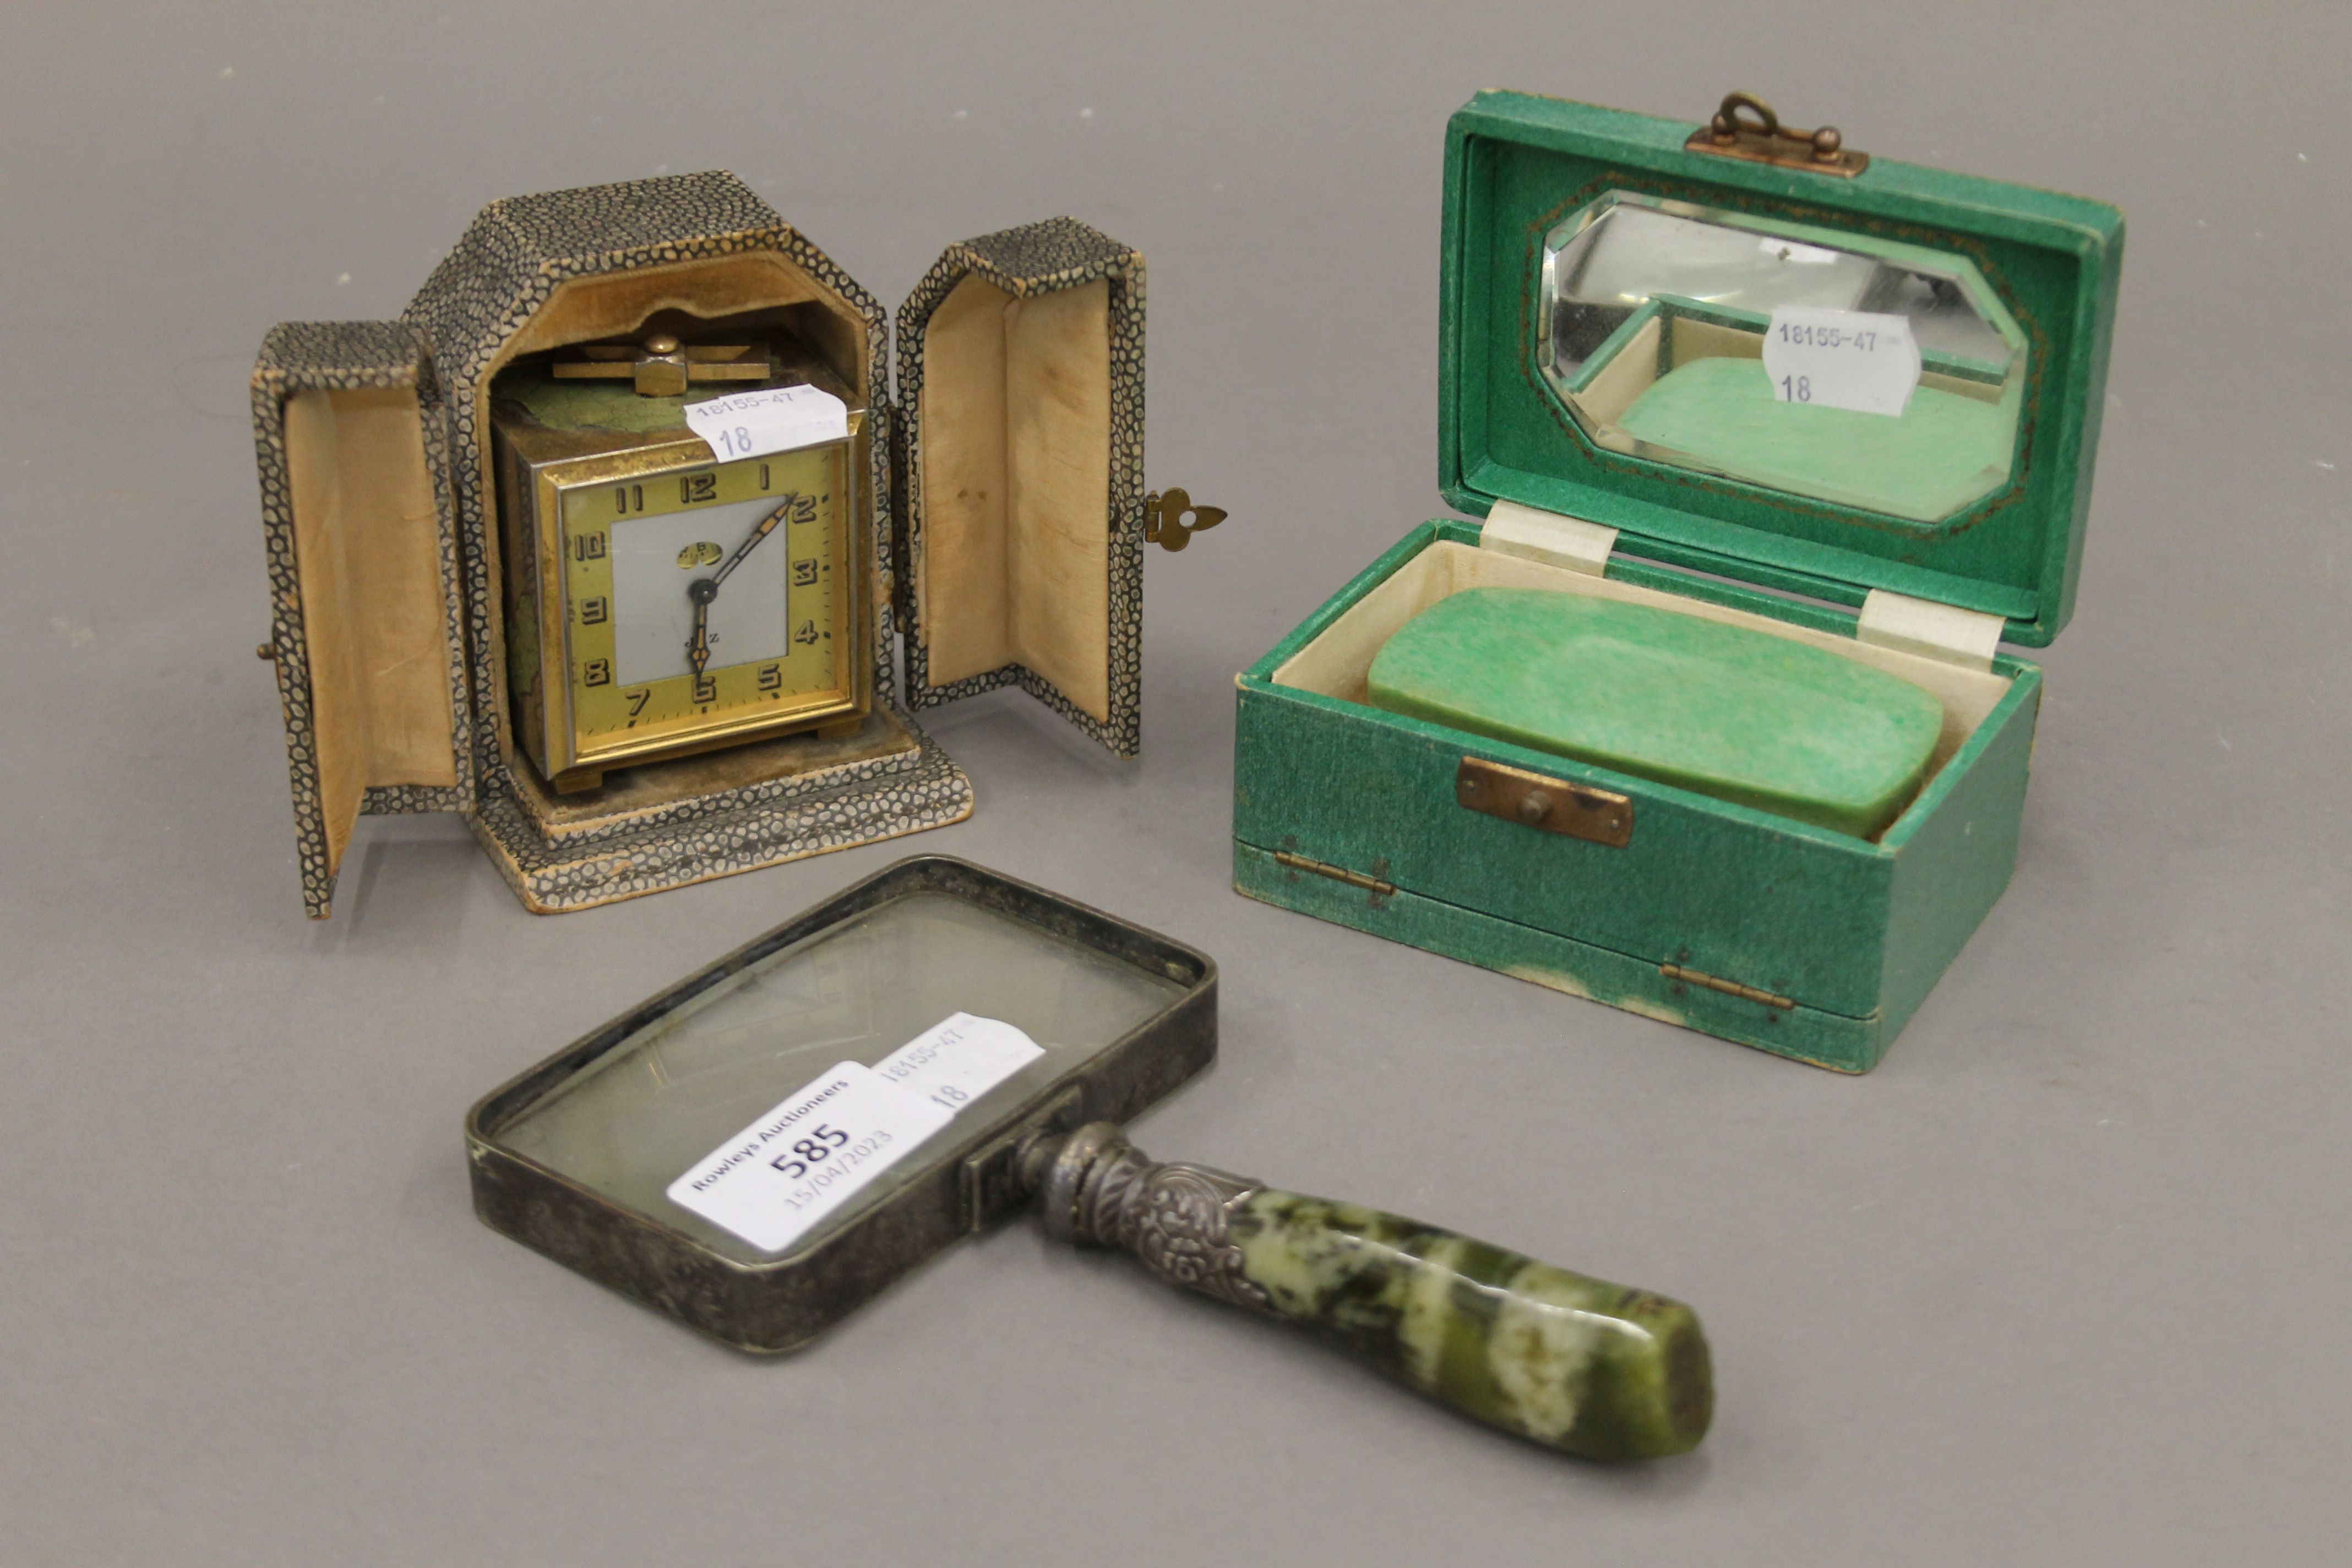 A cased clock, a magnifying glass and a box. The magnifying glass 17 cm long.